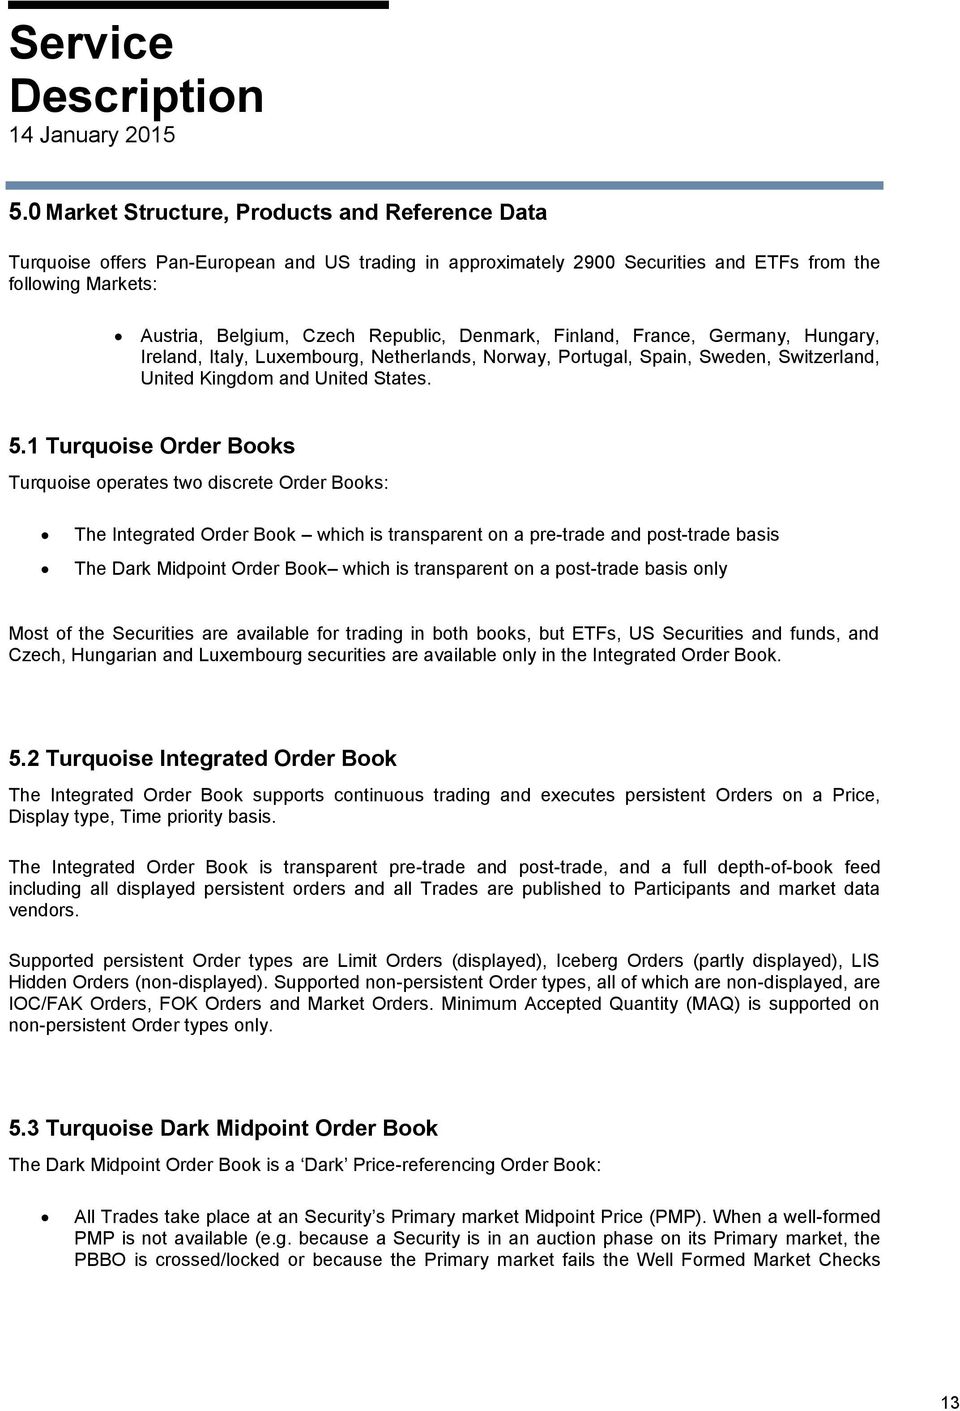 1 Turquoise Order Books Turquoise operates two discrete Order Books: The Integrated Order Book which is transparent on a pre-trade and post-trade basis The Dark Midpoint Order Book which is